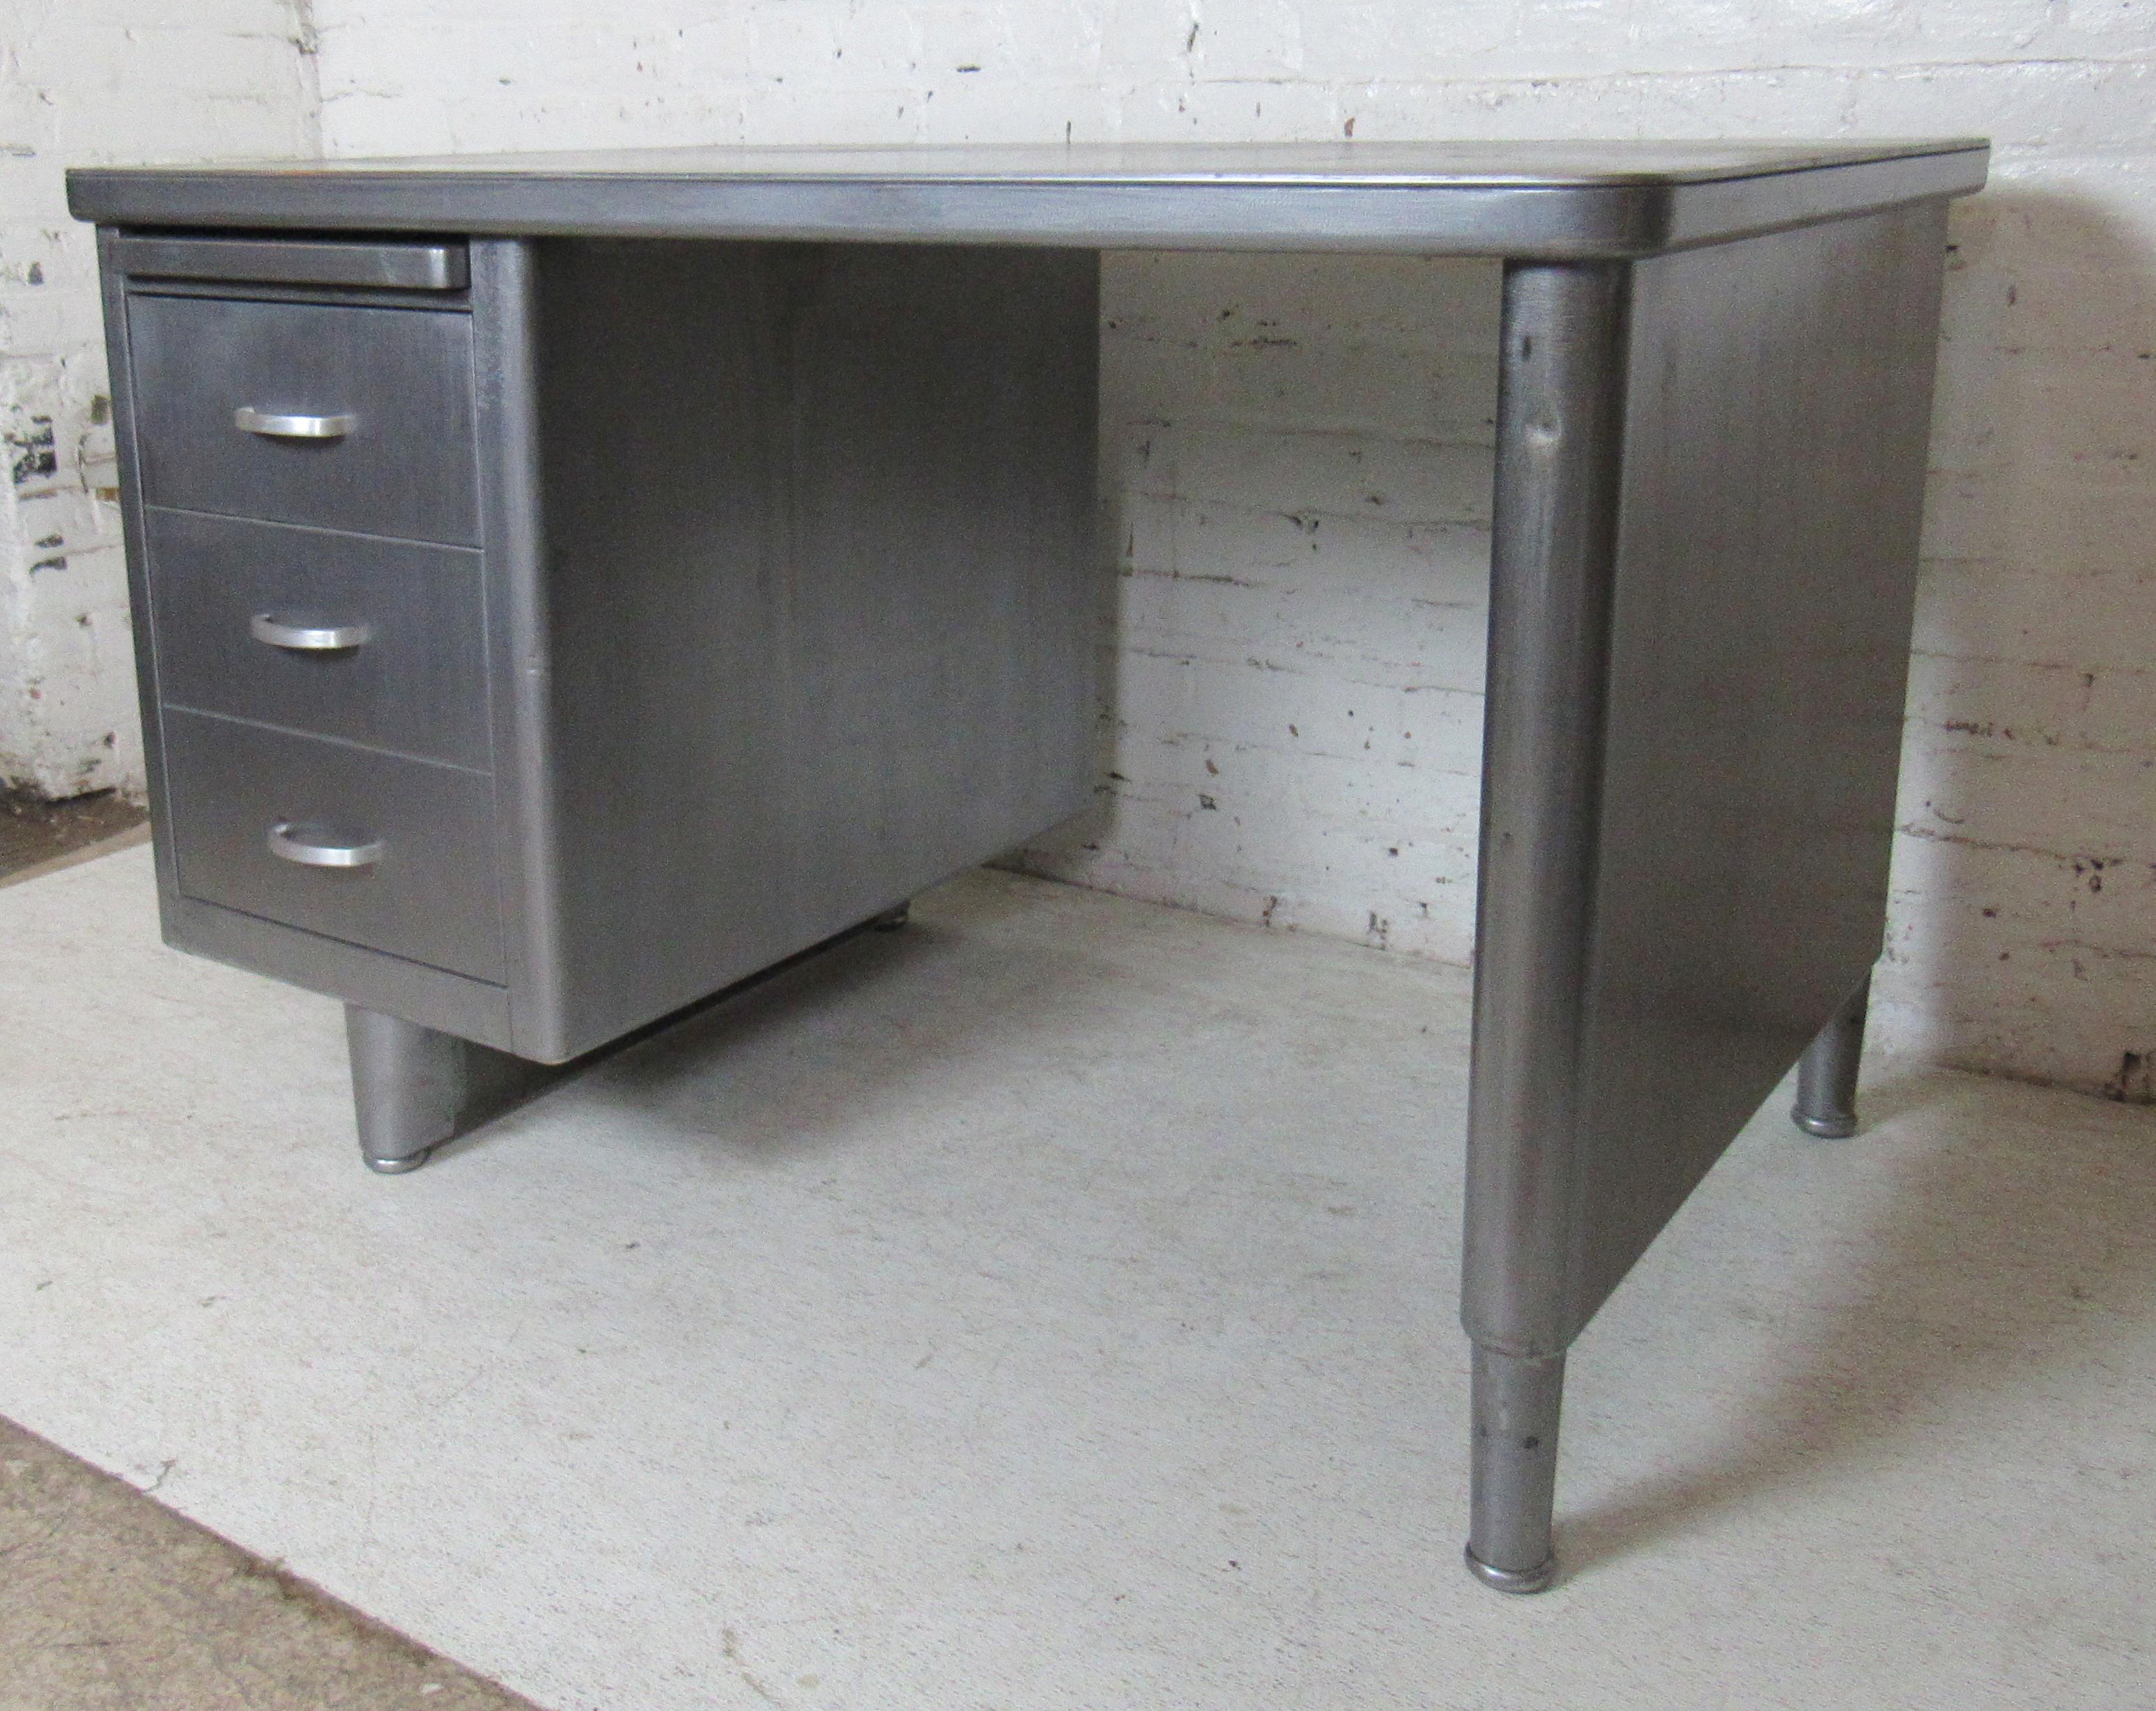 Midcentury metal tanker style desk with two drawers and pull out writing shelf.
(Please confirm item location - NY or NJ - with dealer).
 